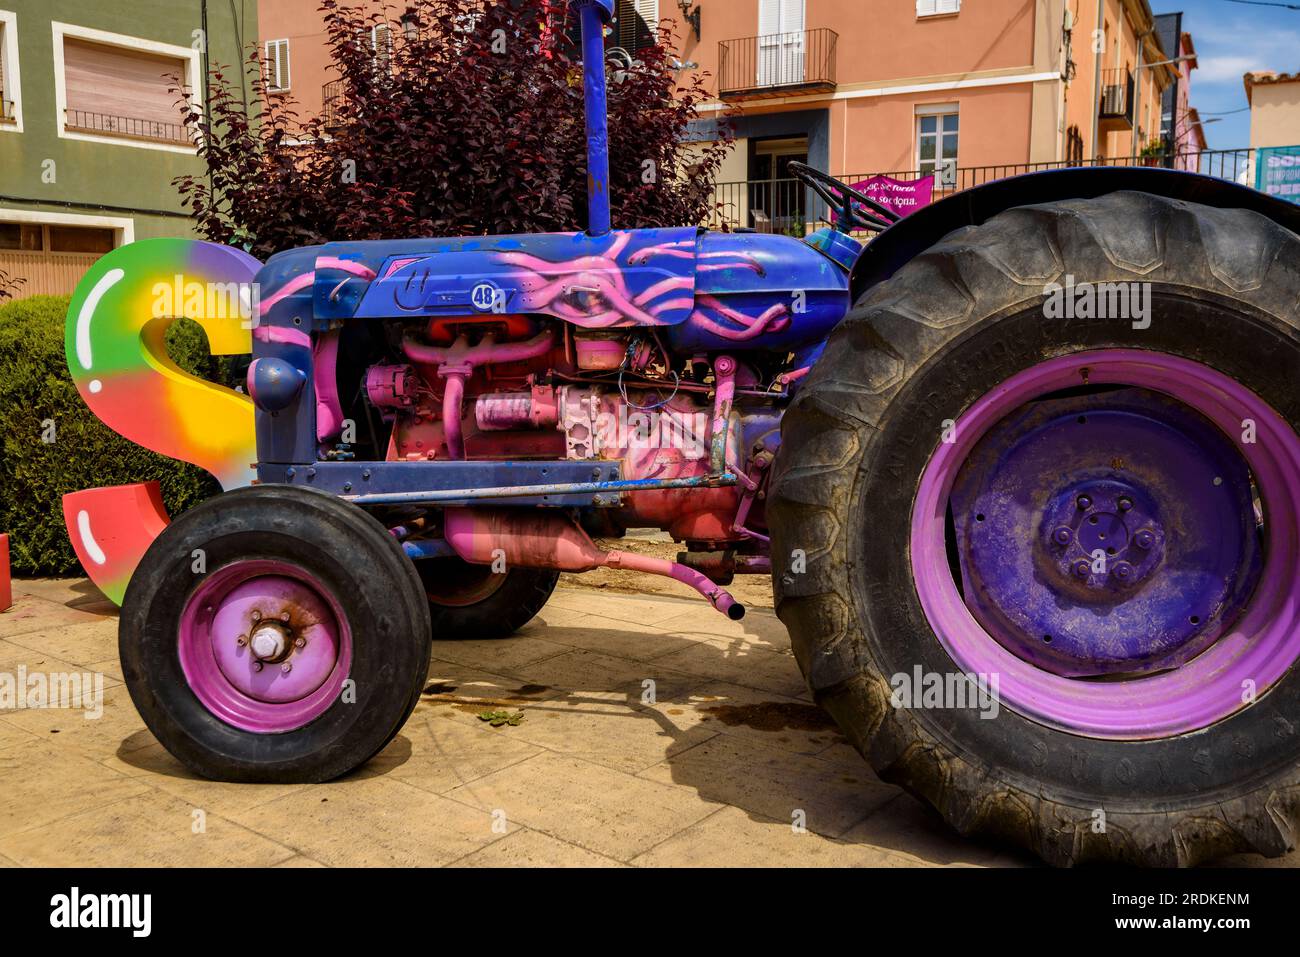 Main square of Penelles with a sign of the name of the town and a painted tractor (La Noguera, Lleida, Catalonia, Spain) ESP: Plaza Mayor de Penelles Stock Photo